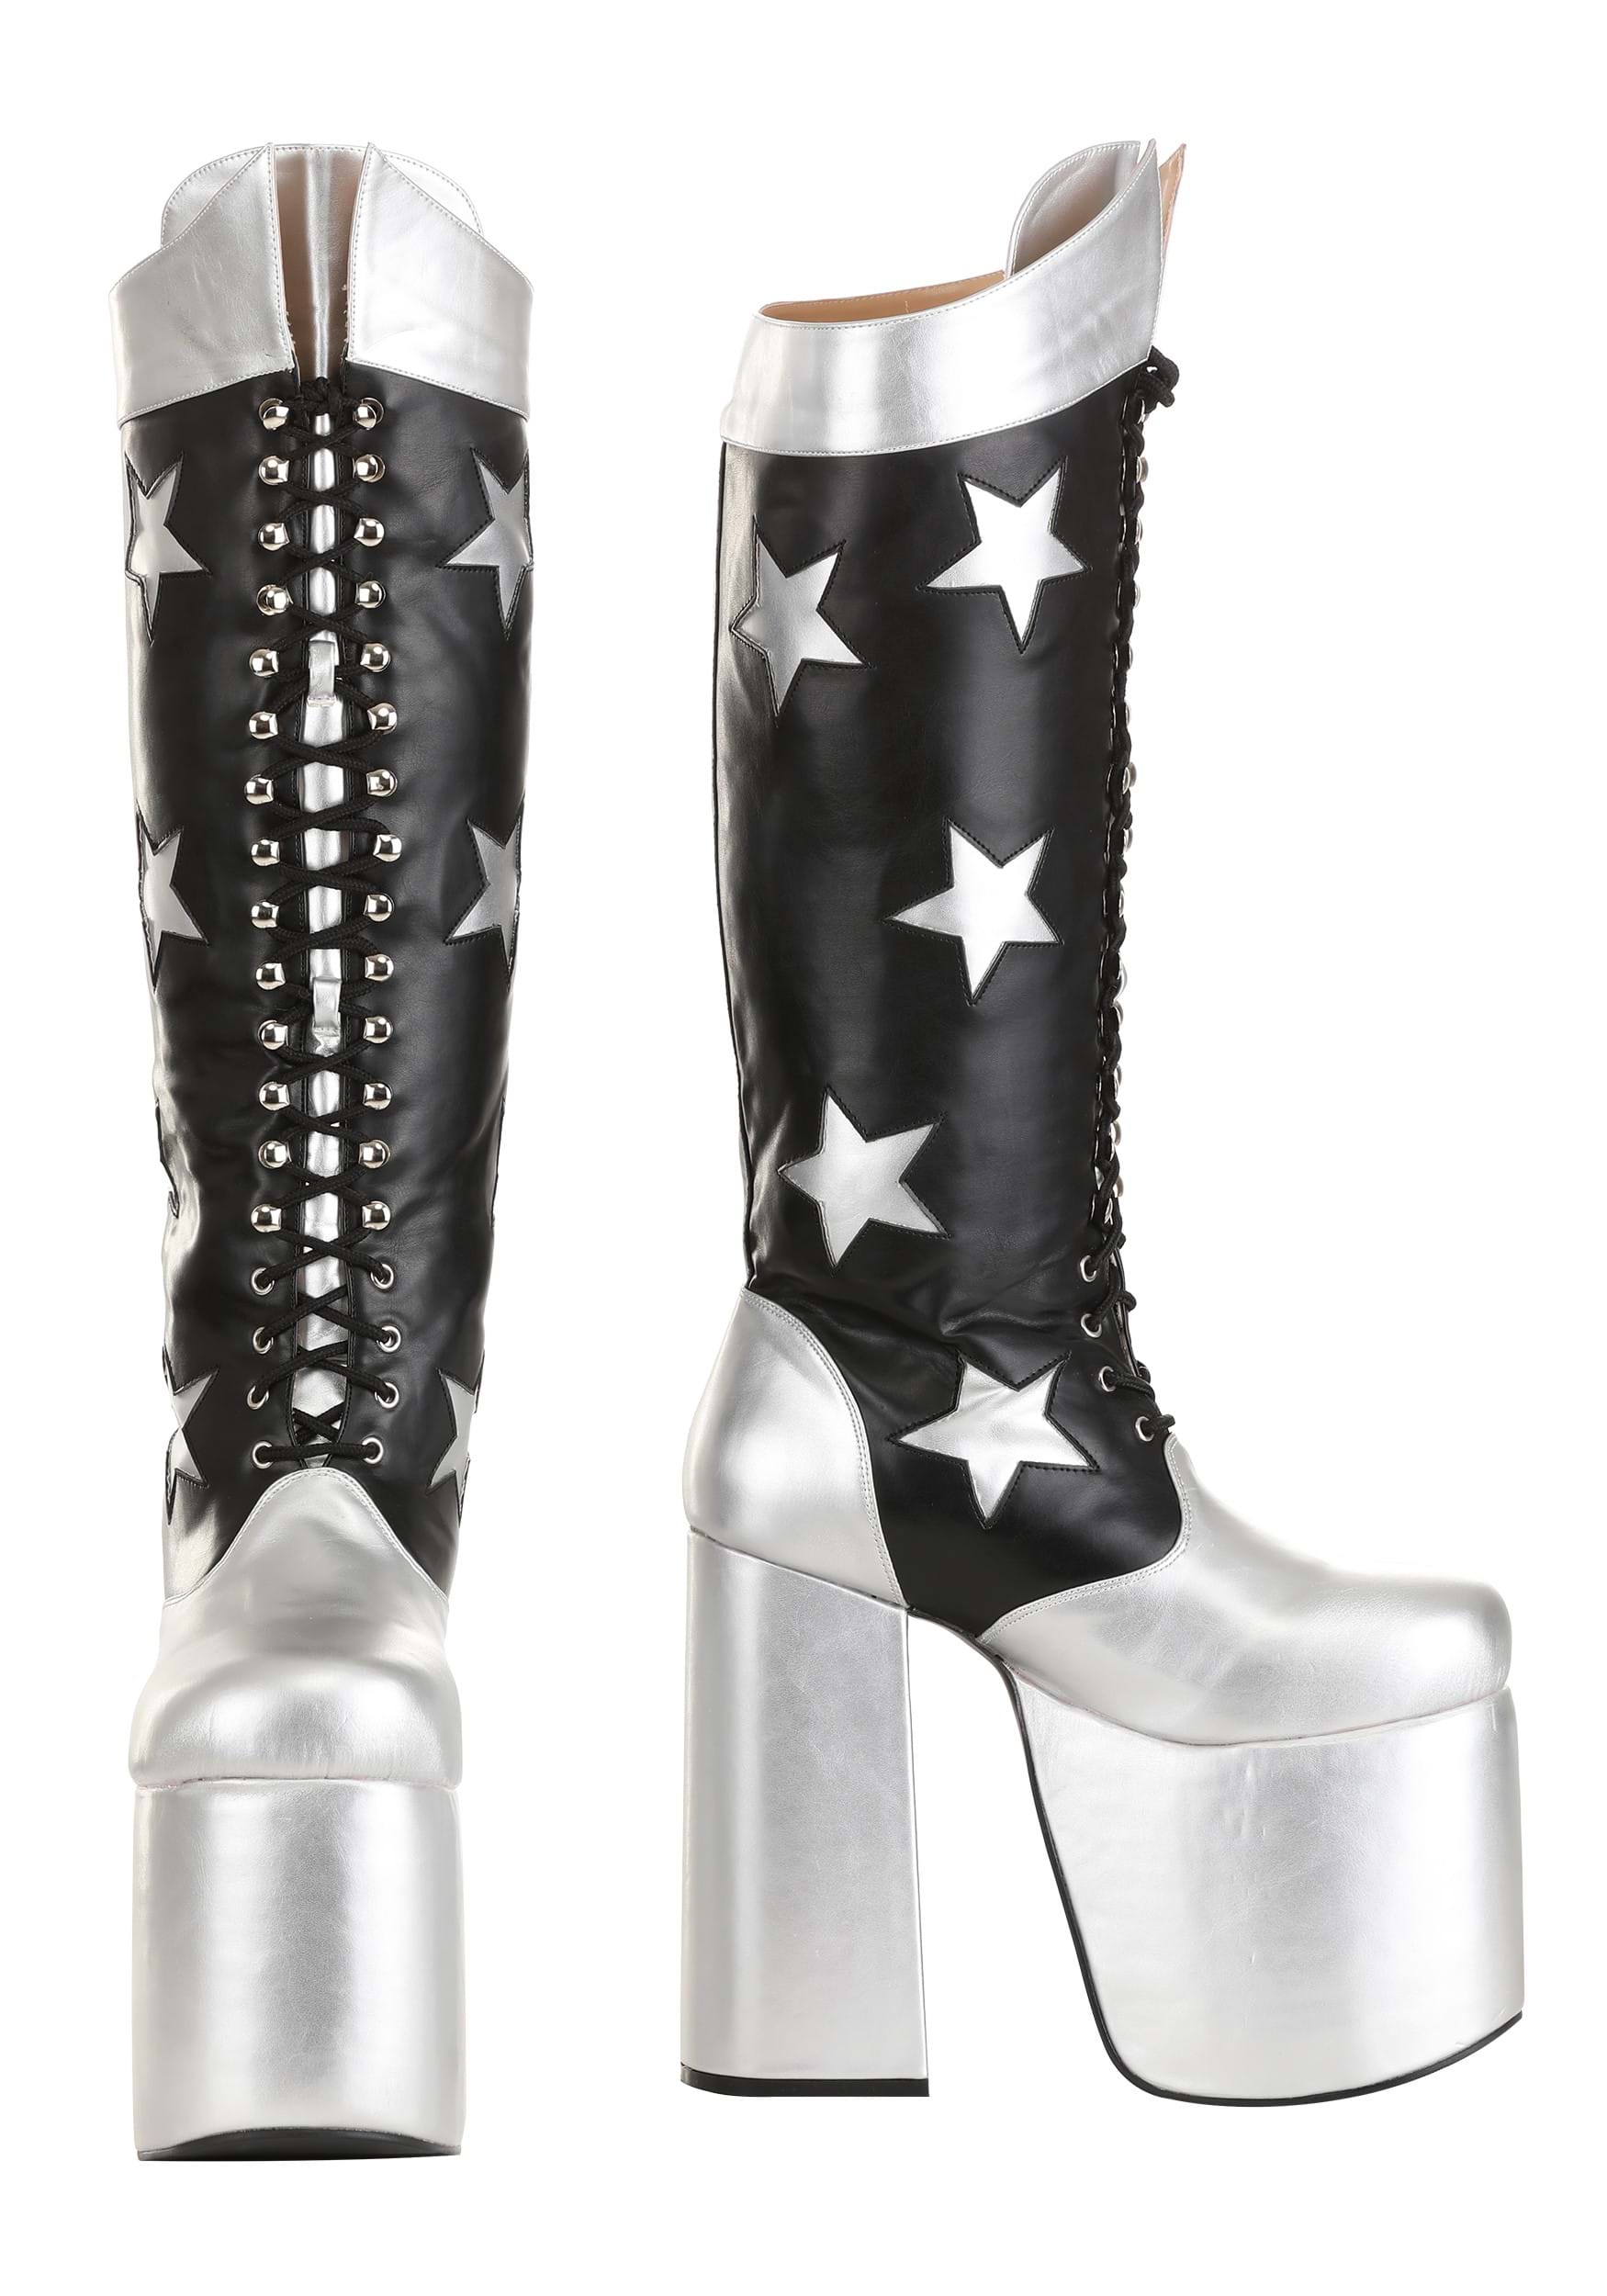 Image of KISS Starchild Boots | Exclusive Costume Boots ID FUN1951AD-8